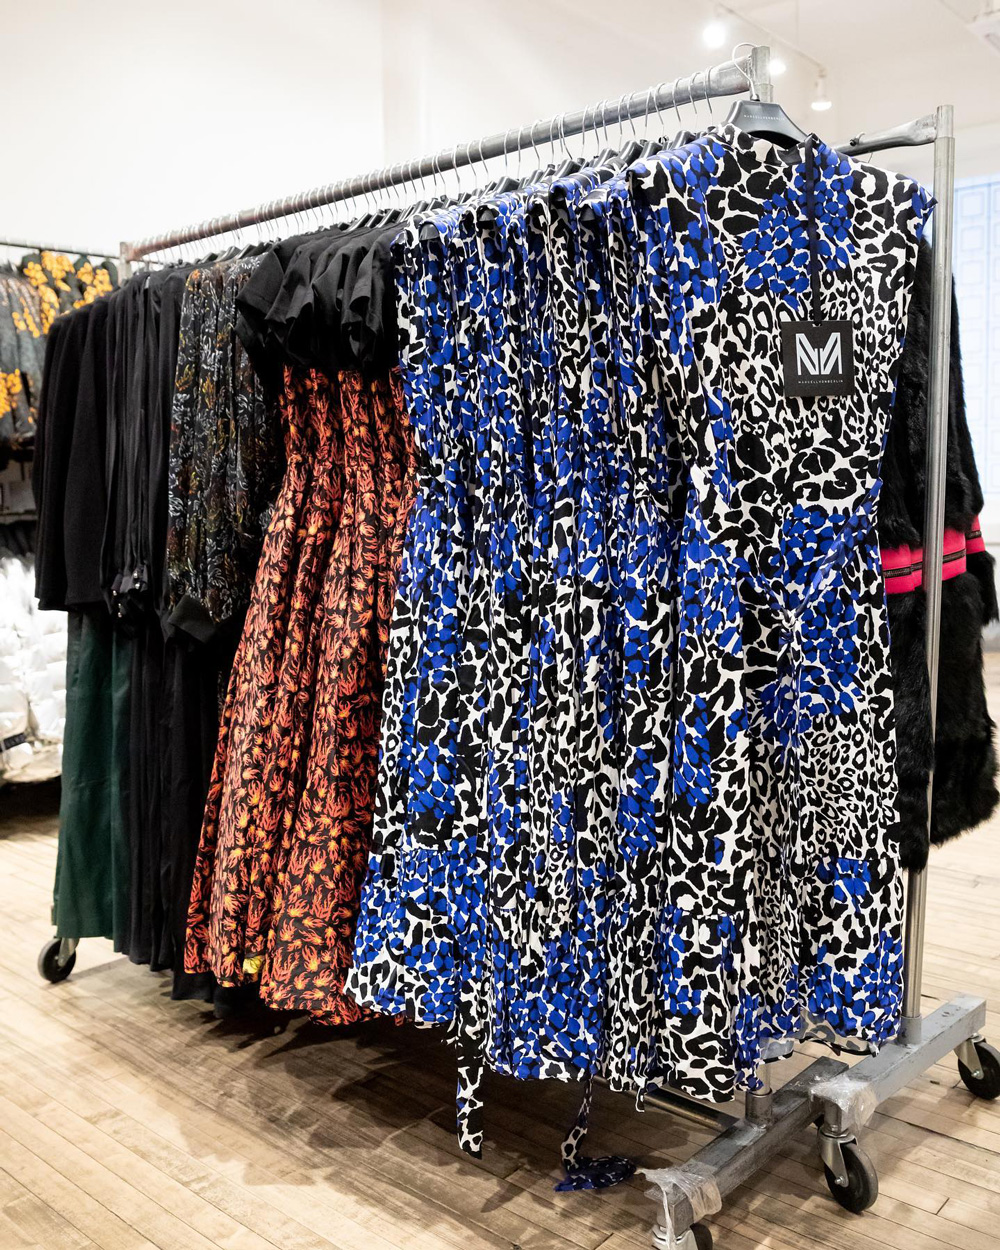 Marcell von Berlin + HOLDEN Sample Sale in Images